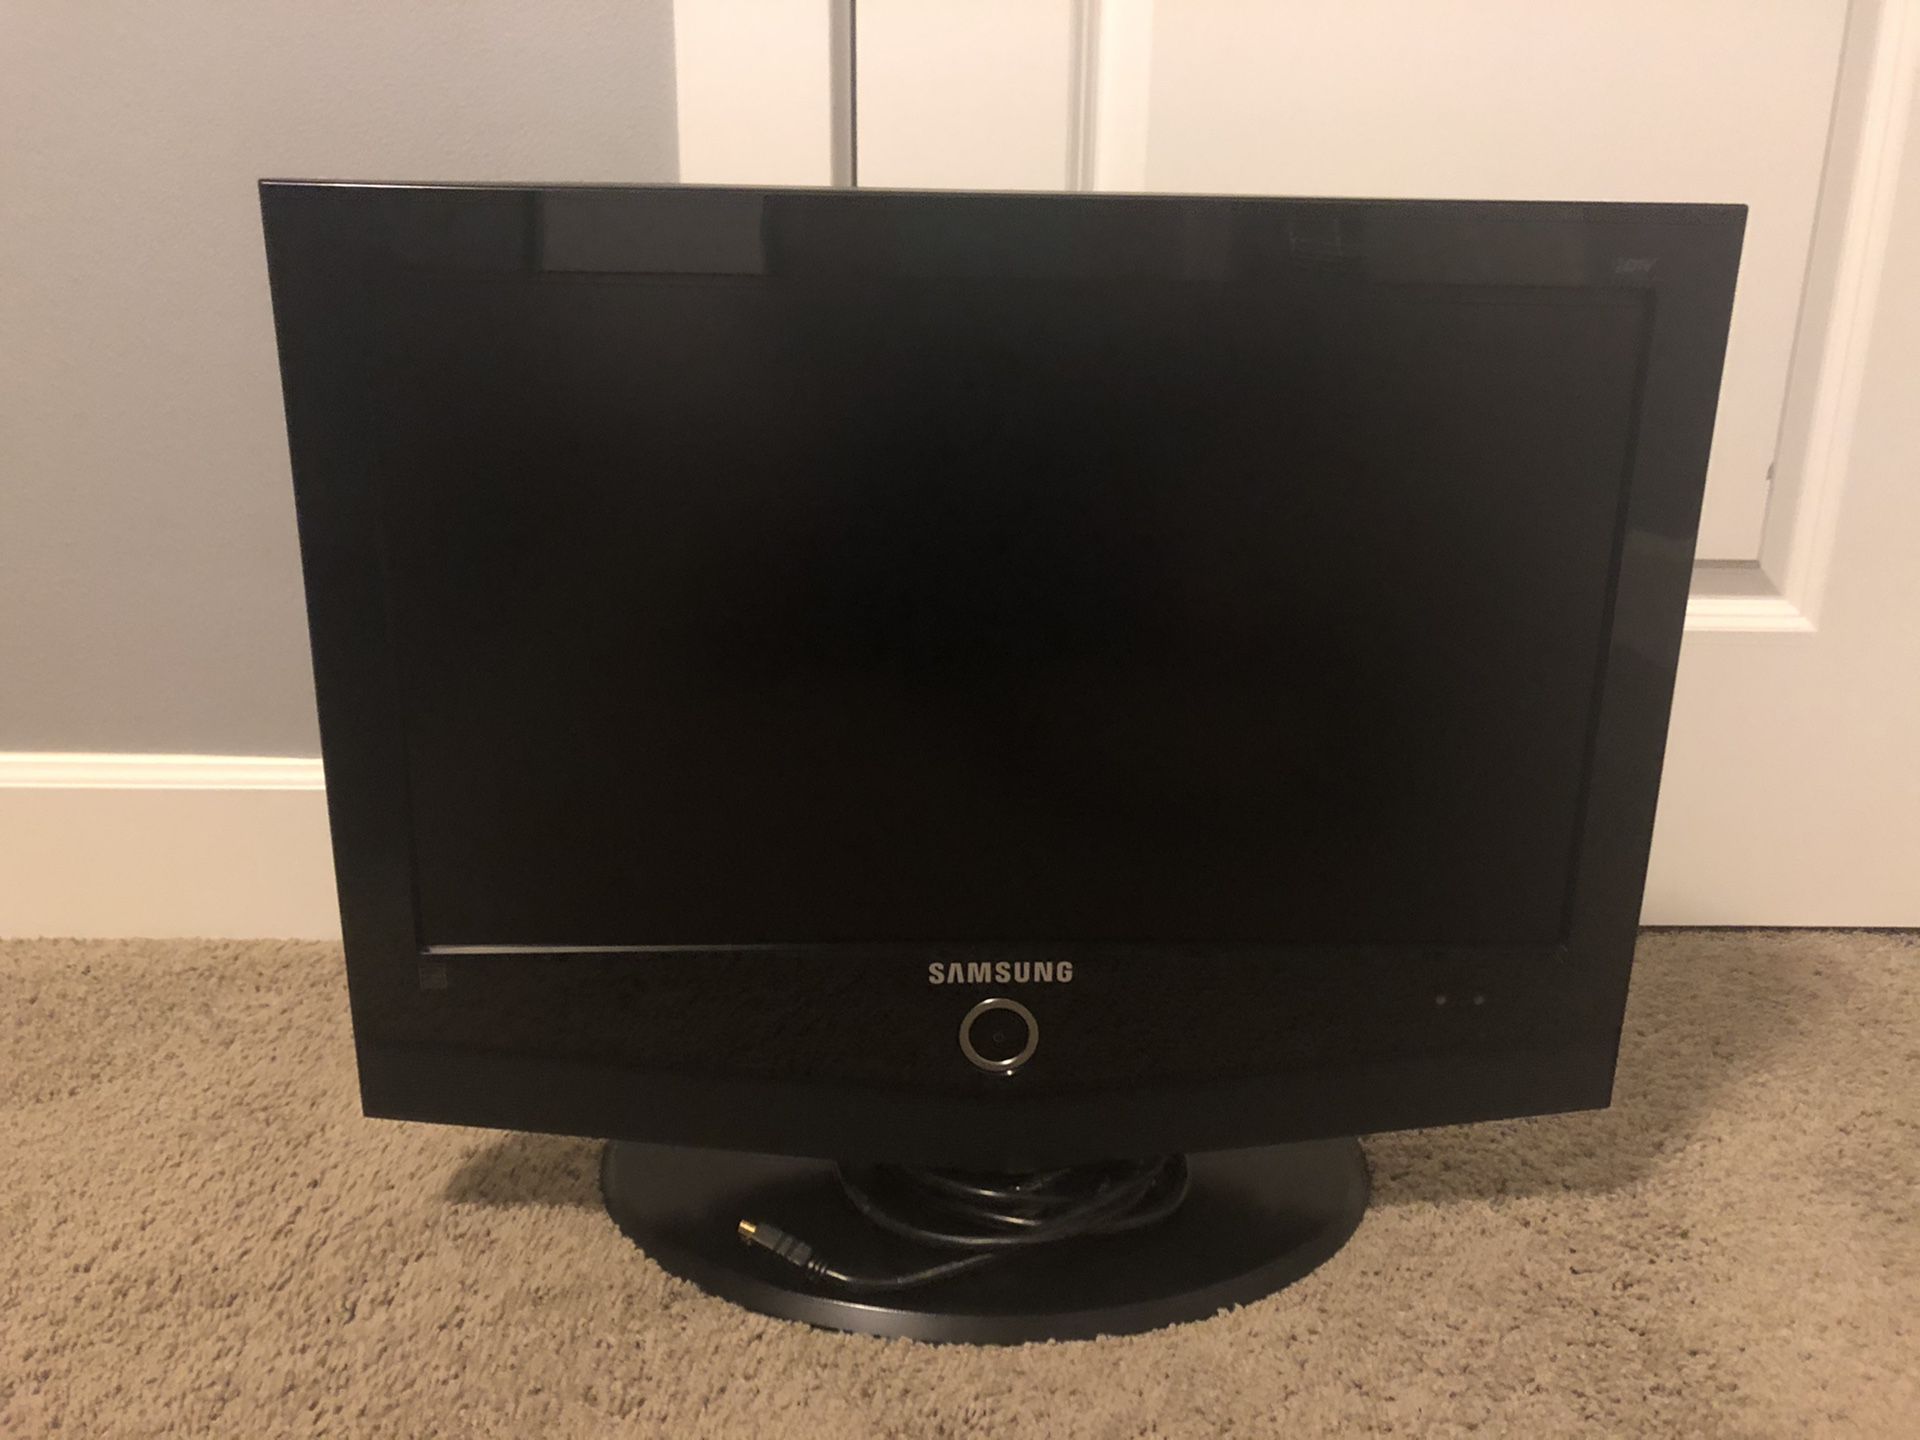 Samsung 25” flat screen HDTV with remote